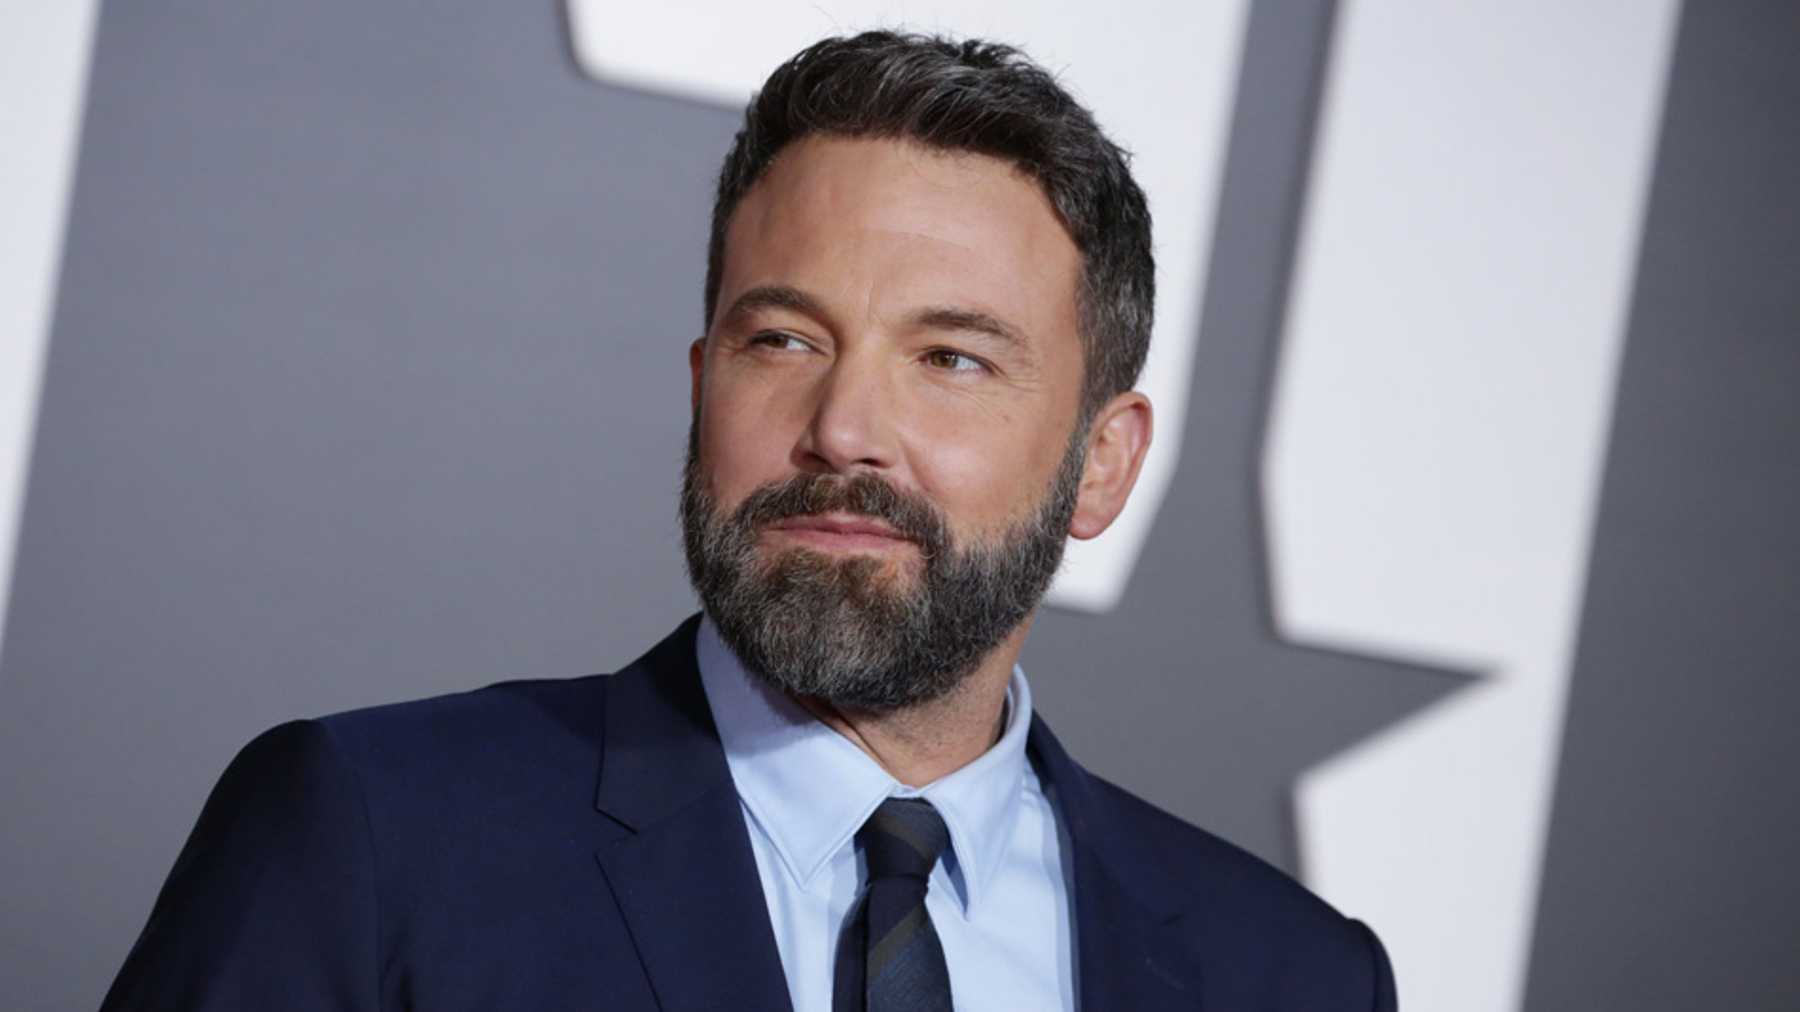 Ben Affleck Reportedly ‘Taking His Sobriety Very Seriously’ Despite